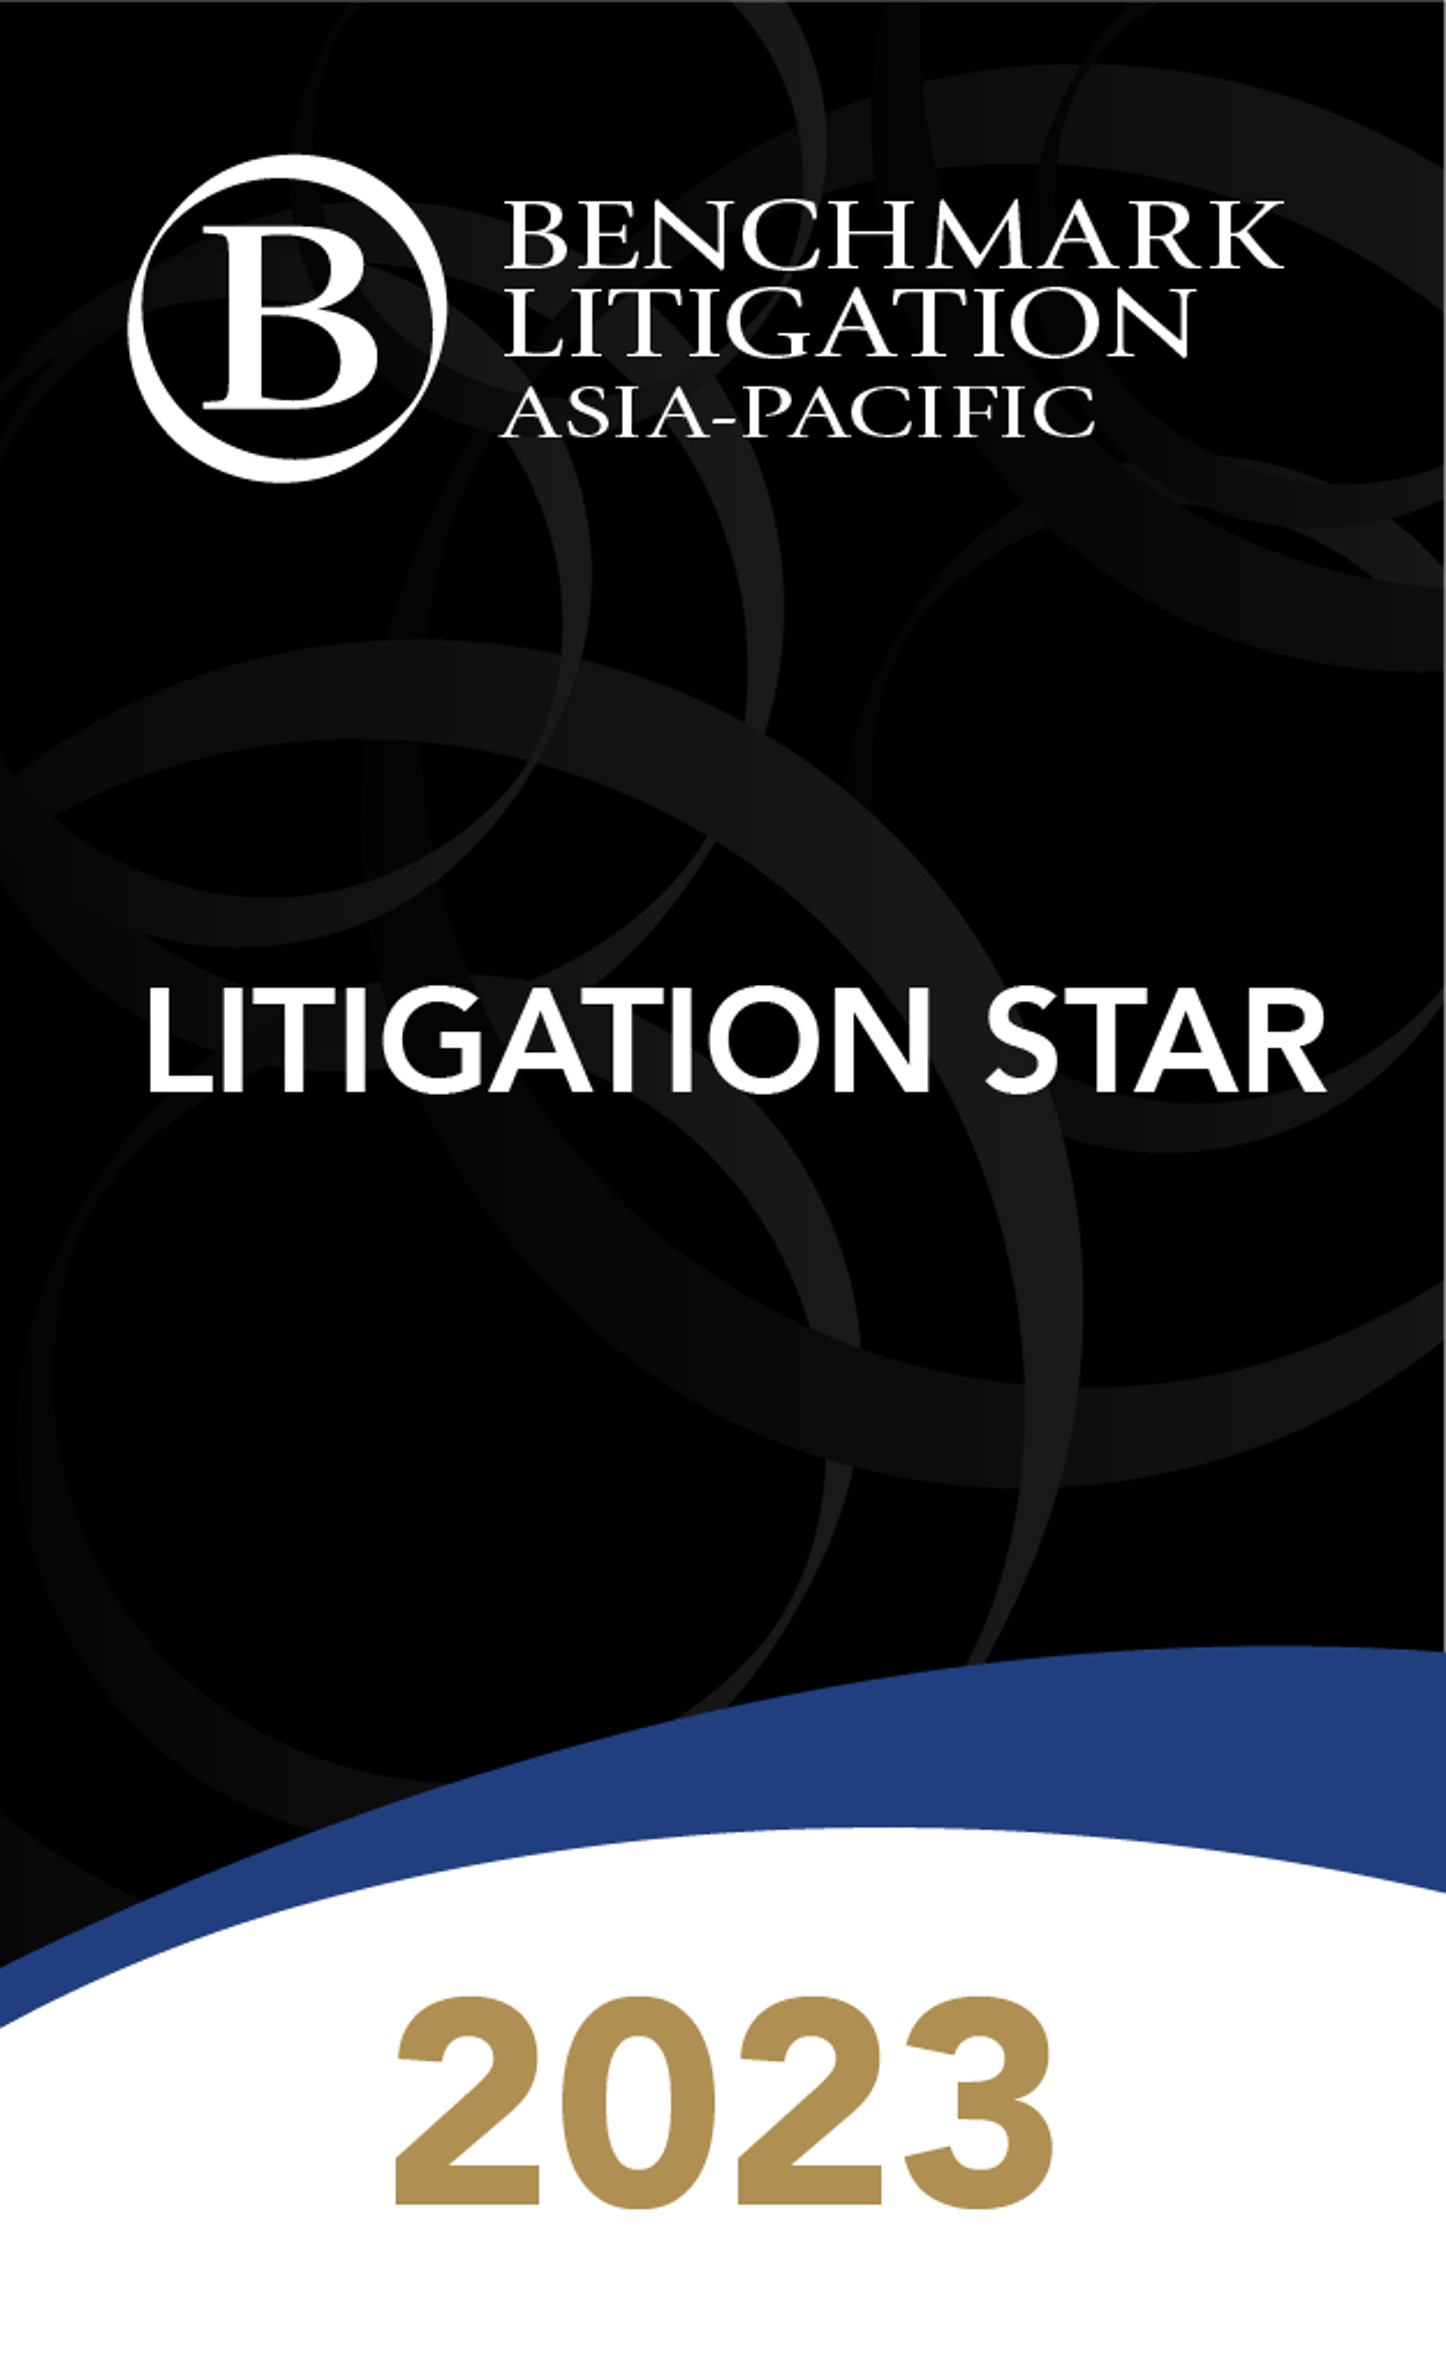 Kareena Teh has been recognised as a “Litigation Star” of the year, 2023